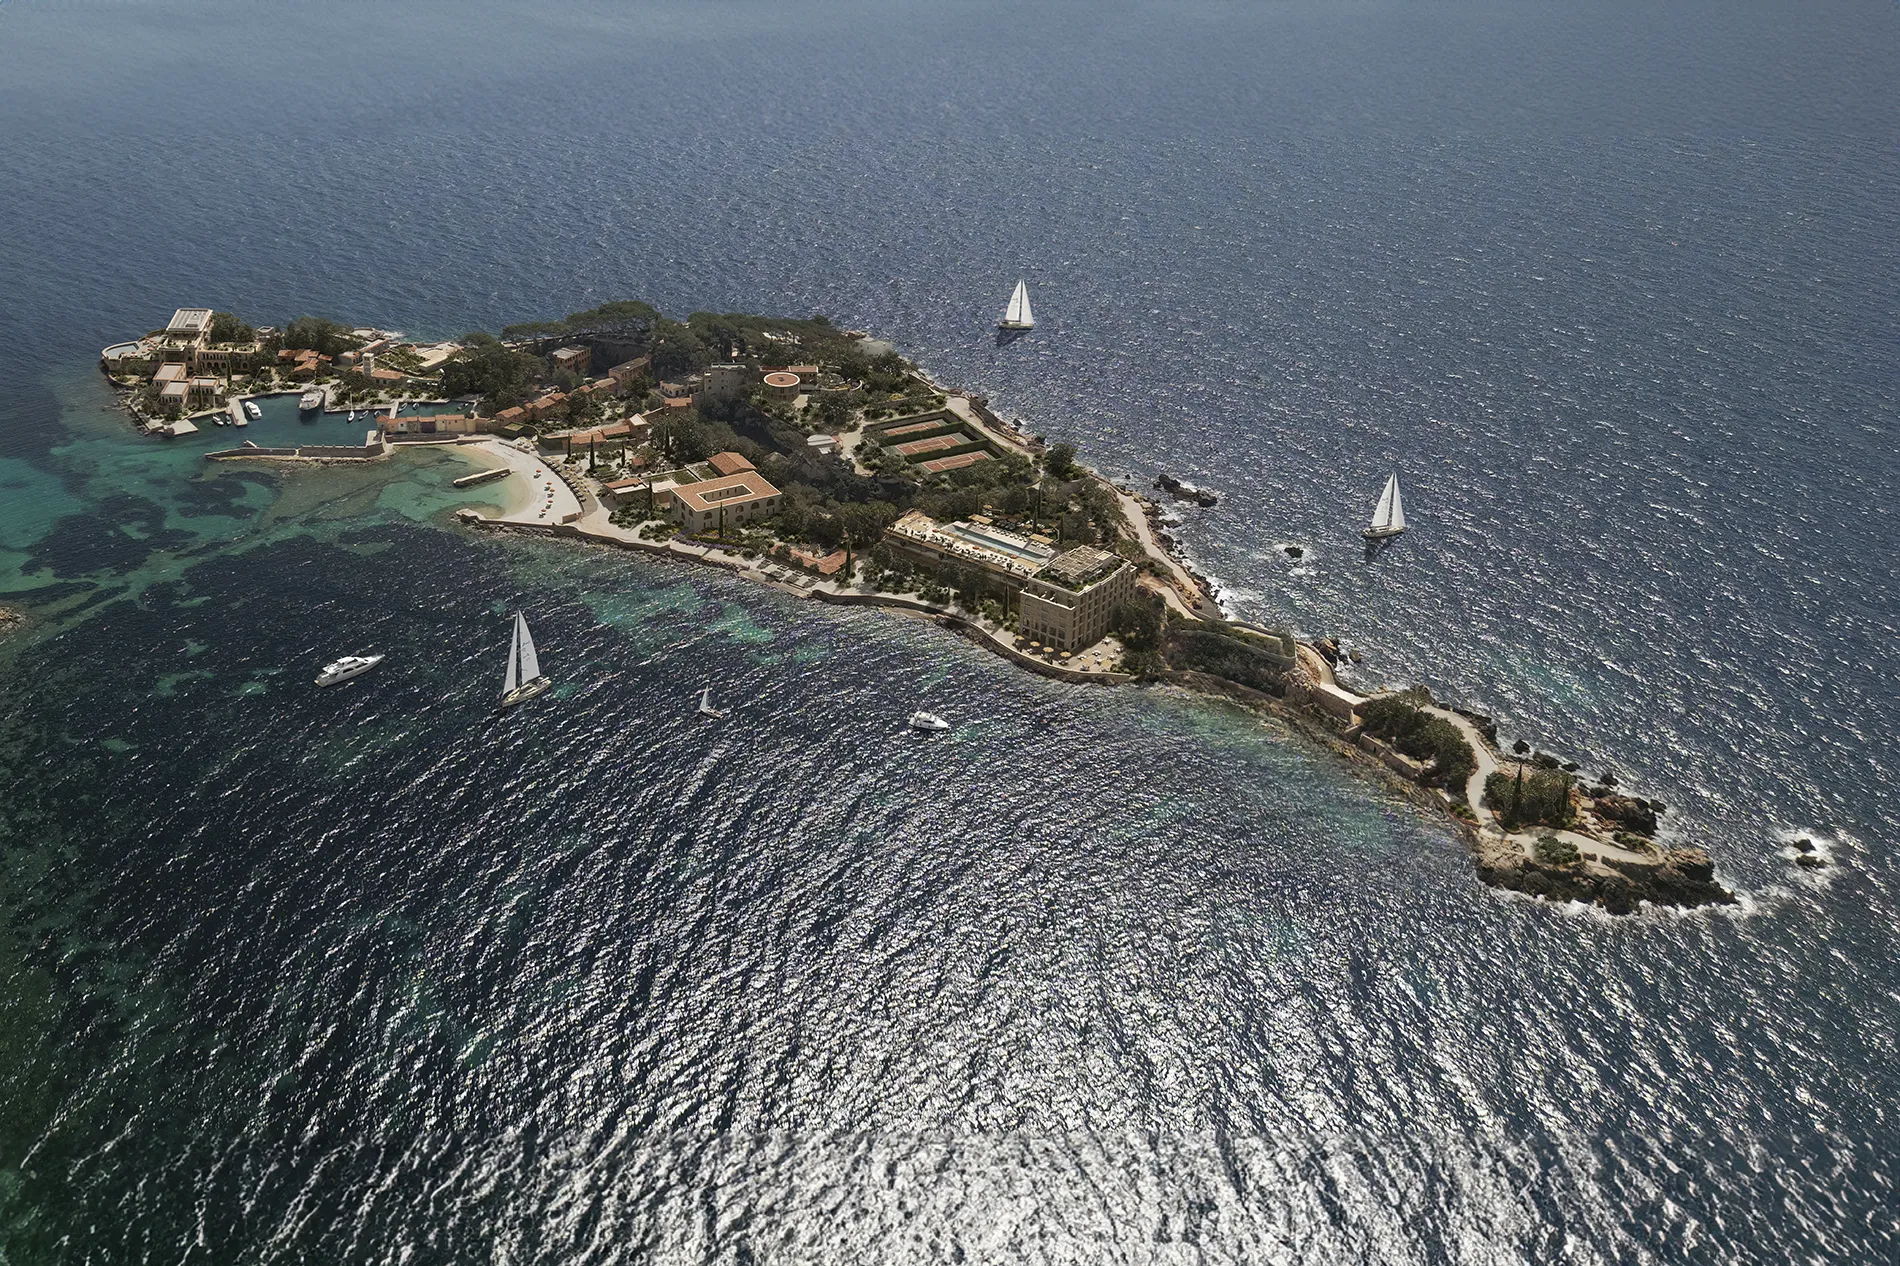 Private Island Retreat with a French Flair: ‘A New Age of Magic’ Starts on Iconic Île de Bendor ()